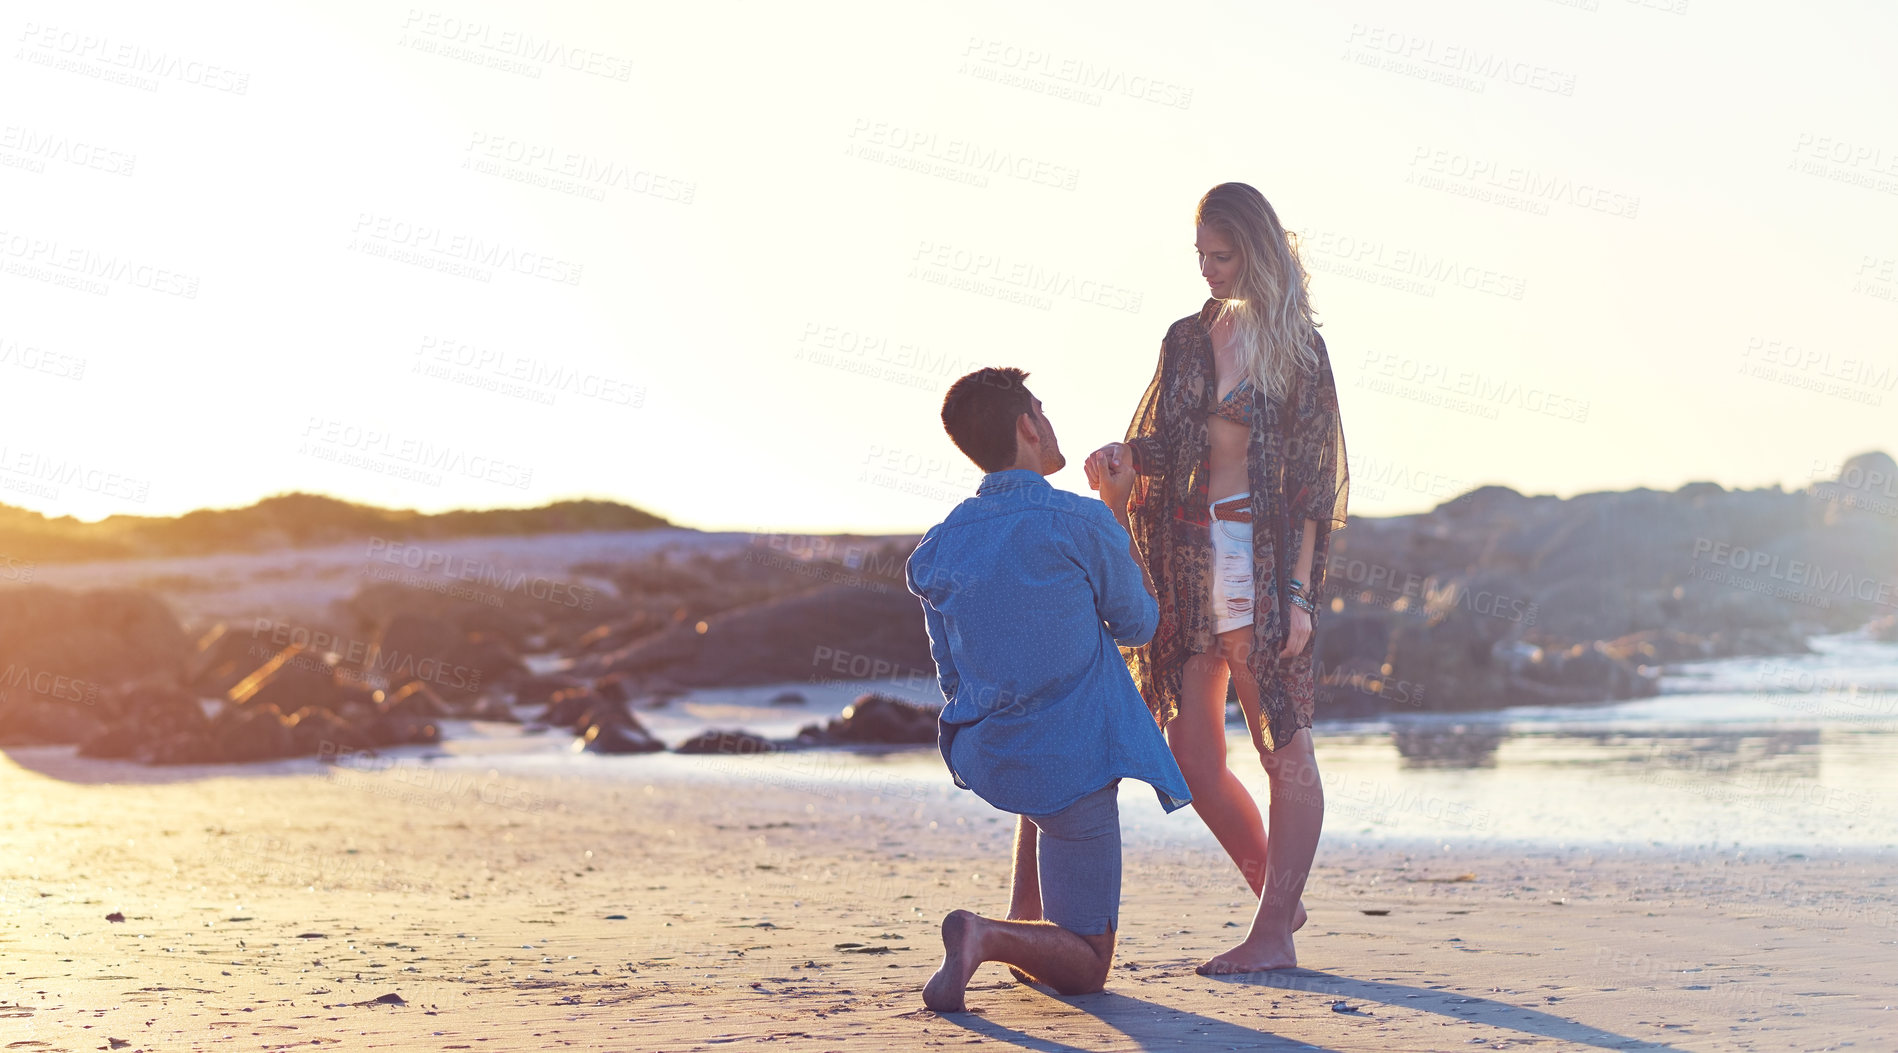 Buy stock photo Shot of a young man holding his girlfriend’s hand on bended knee at the beach